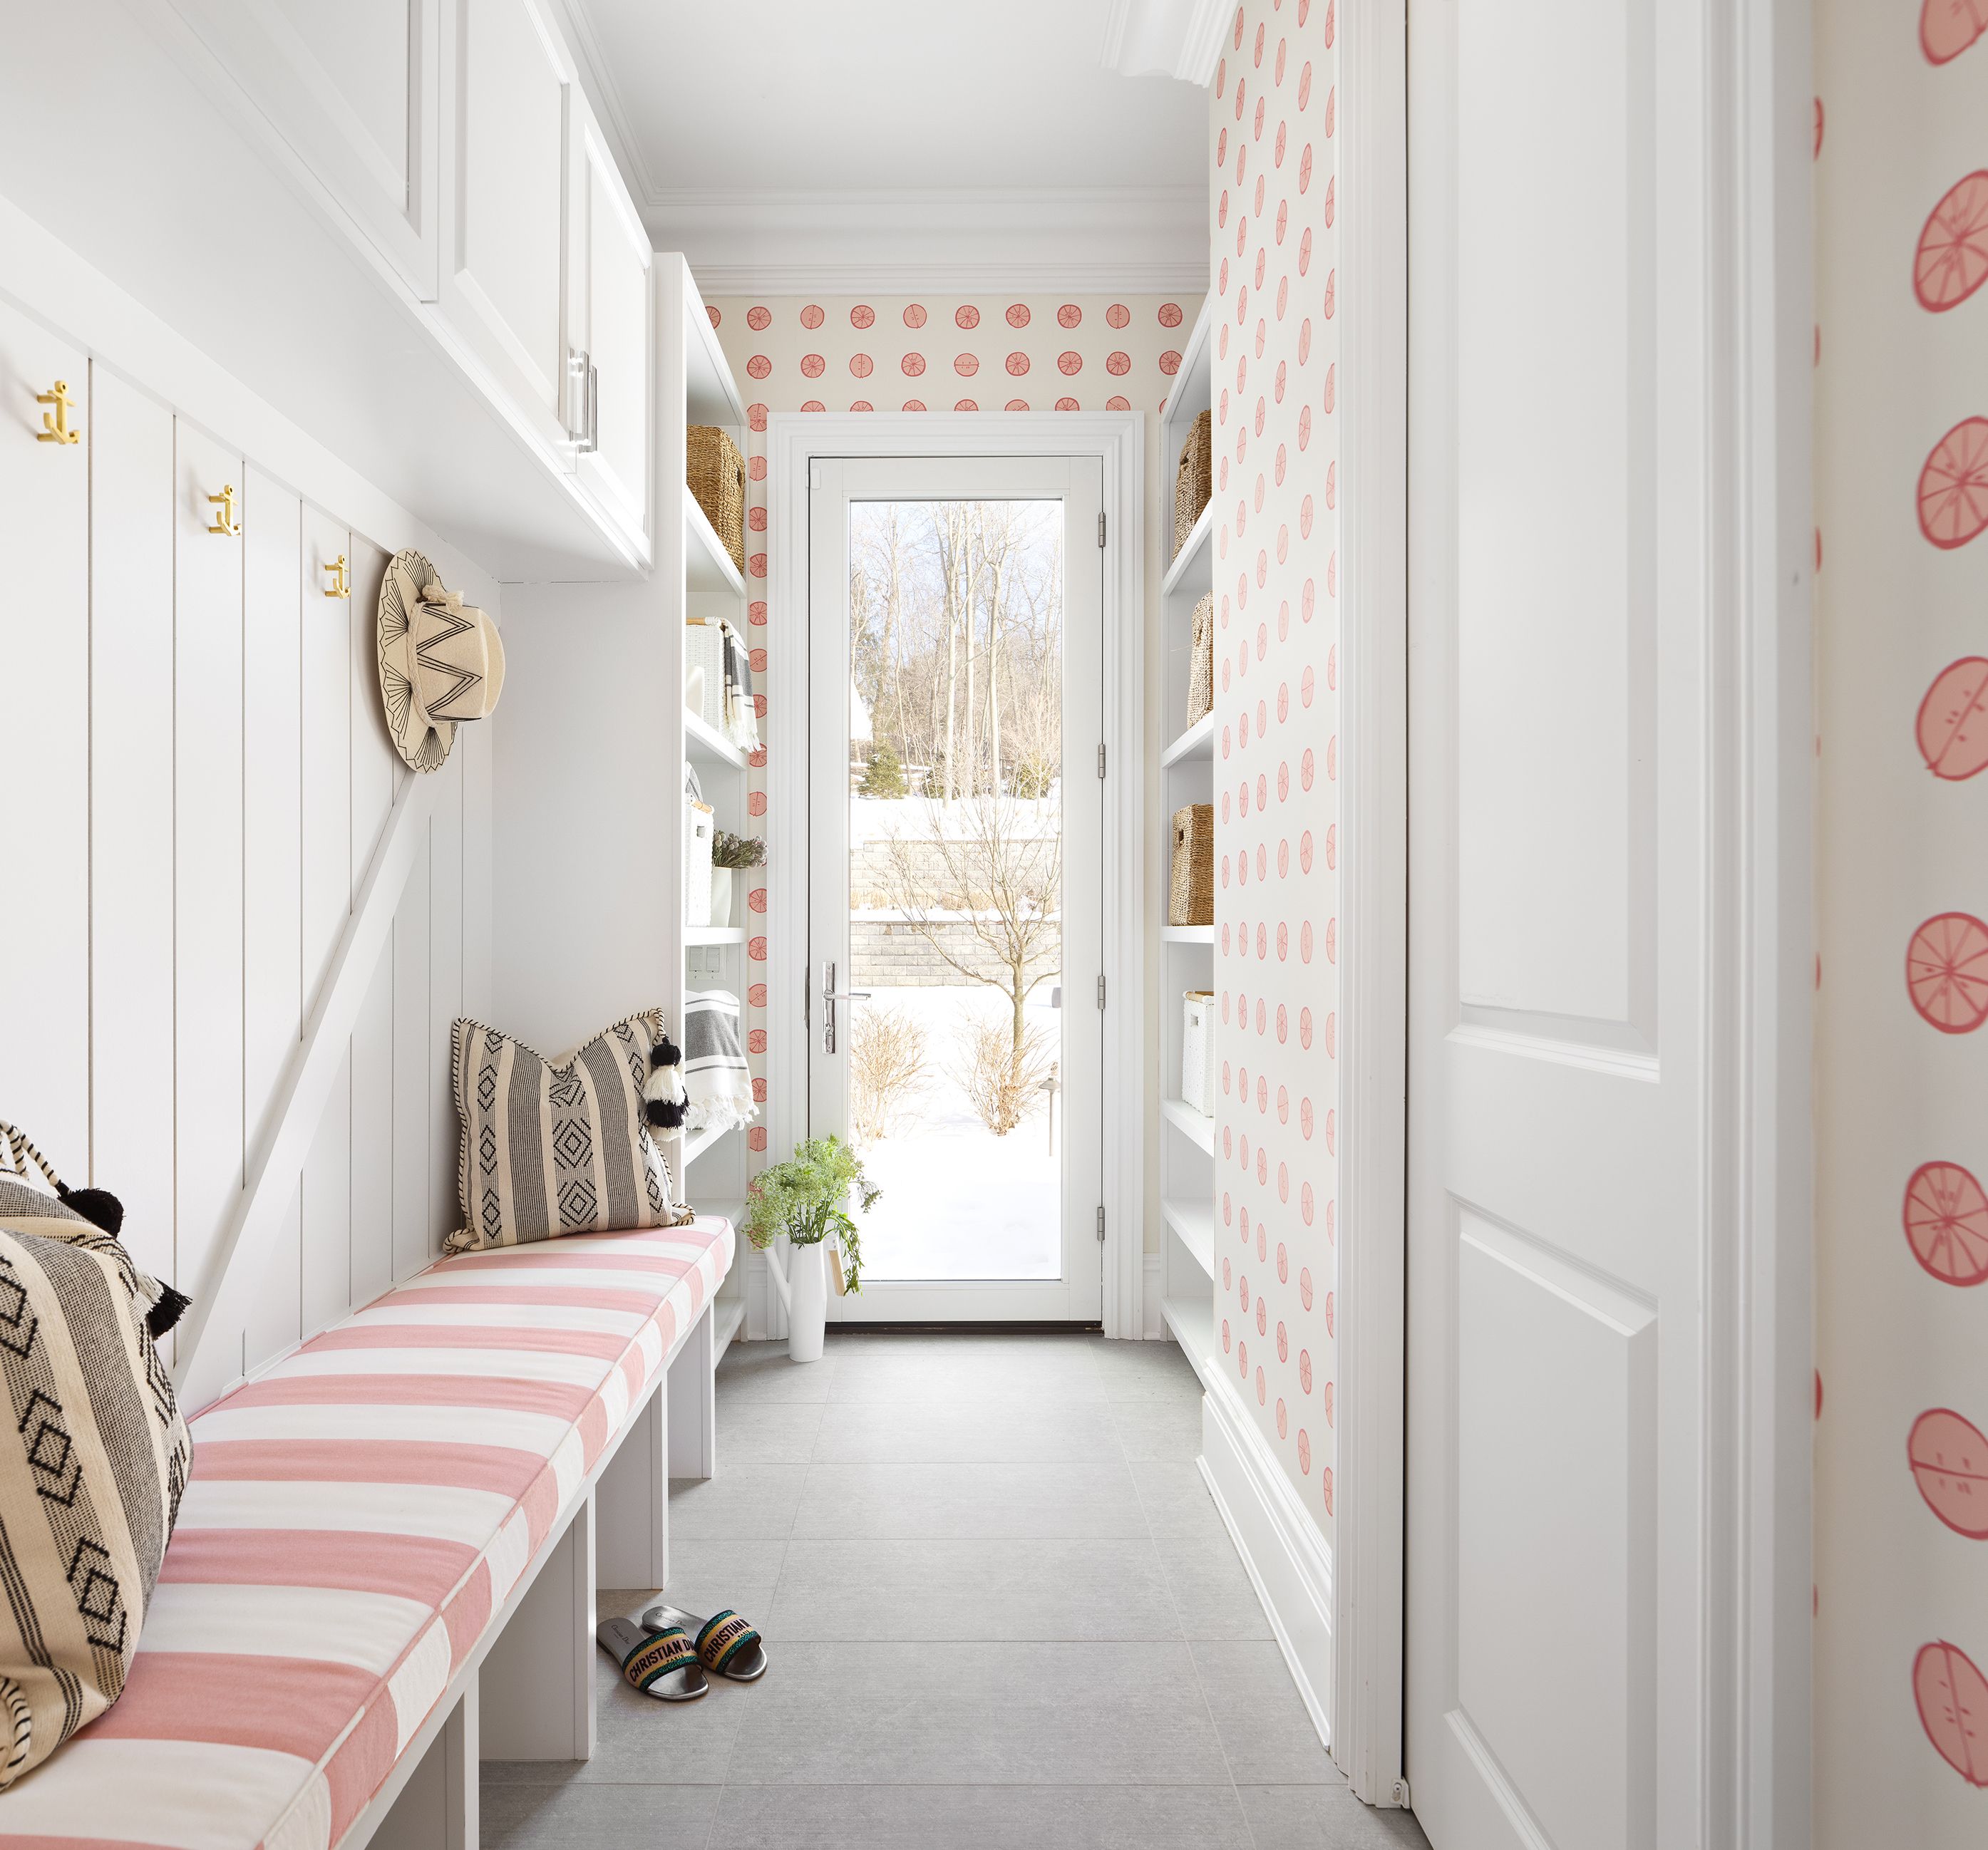 Dressing Up Our Entryway with Board and Batten and Wallpaper  Dear Lillie  Studio